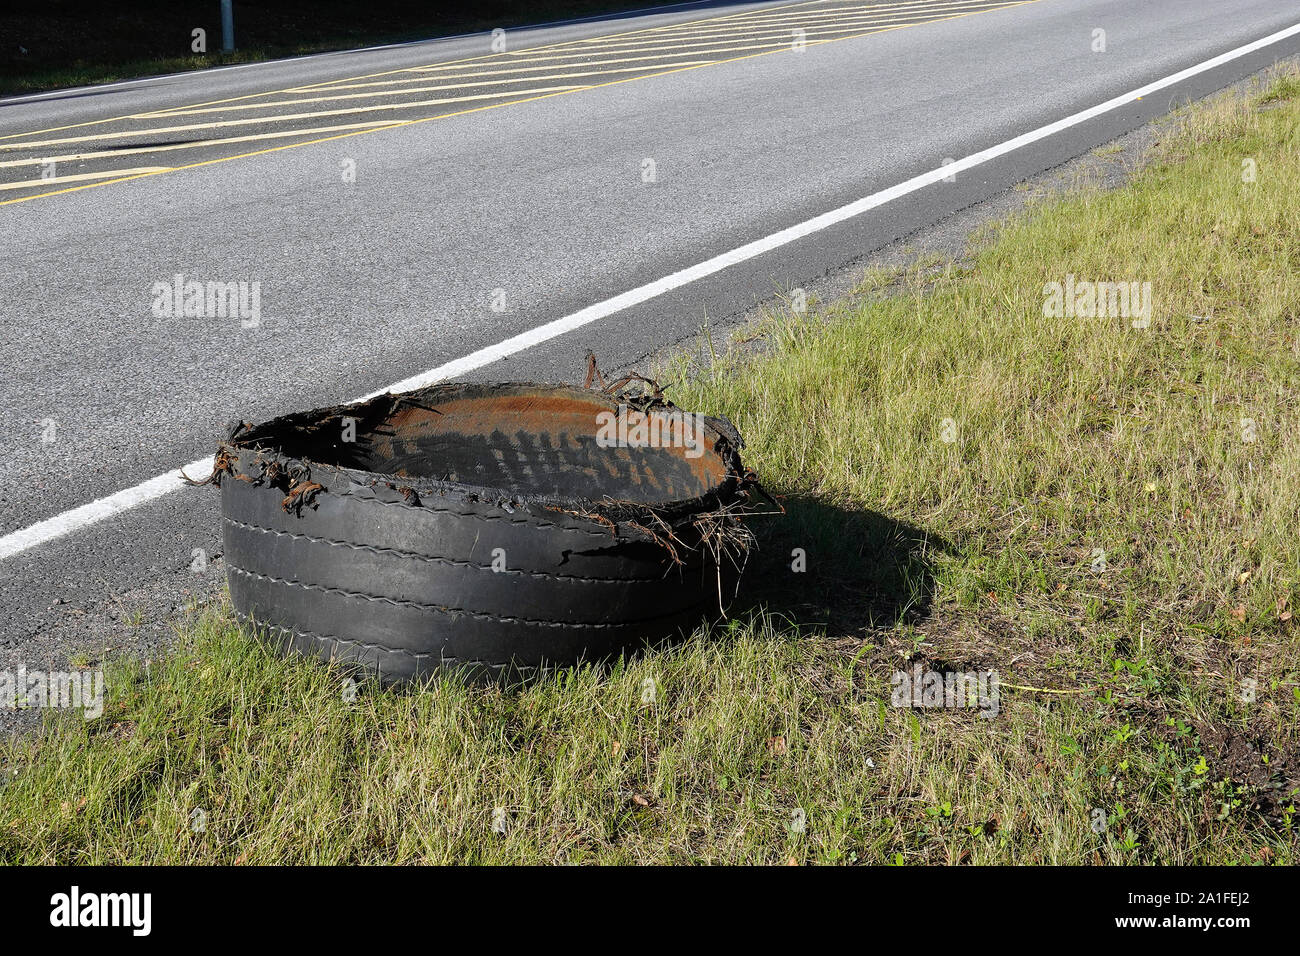 Exploded tire of semi truck on highway roadside. Stock Photo